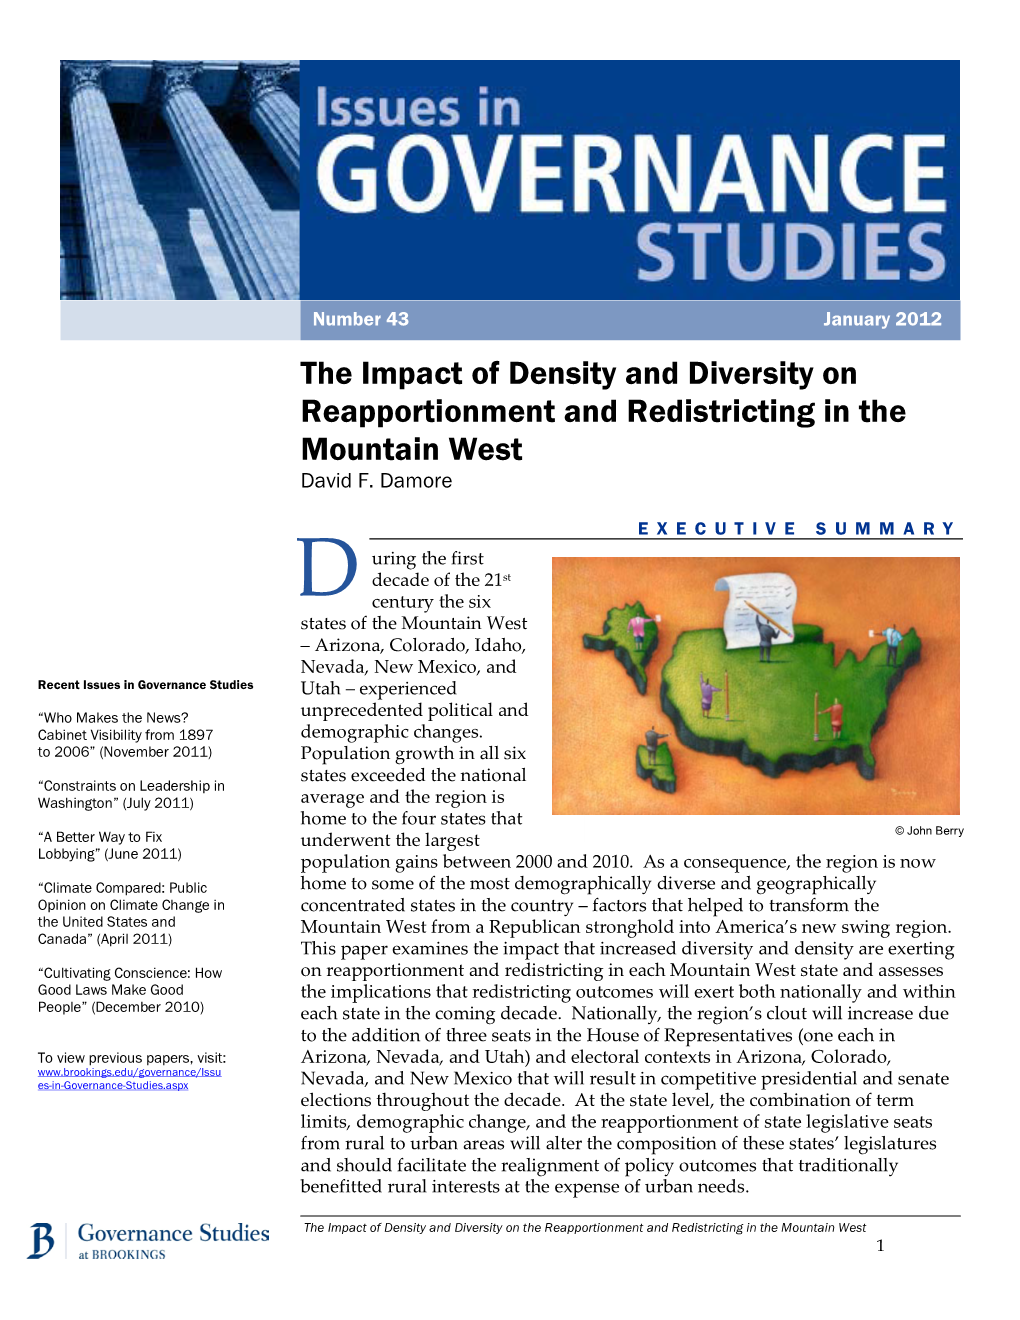 The Impact of Density and Diversity on Reapportionment and Redistricting in the Mountain West David F